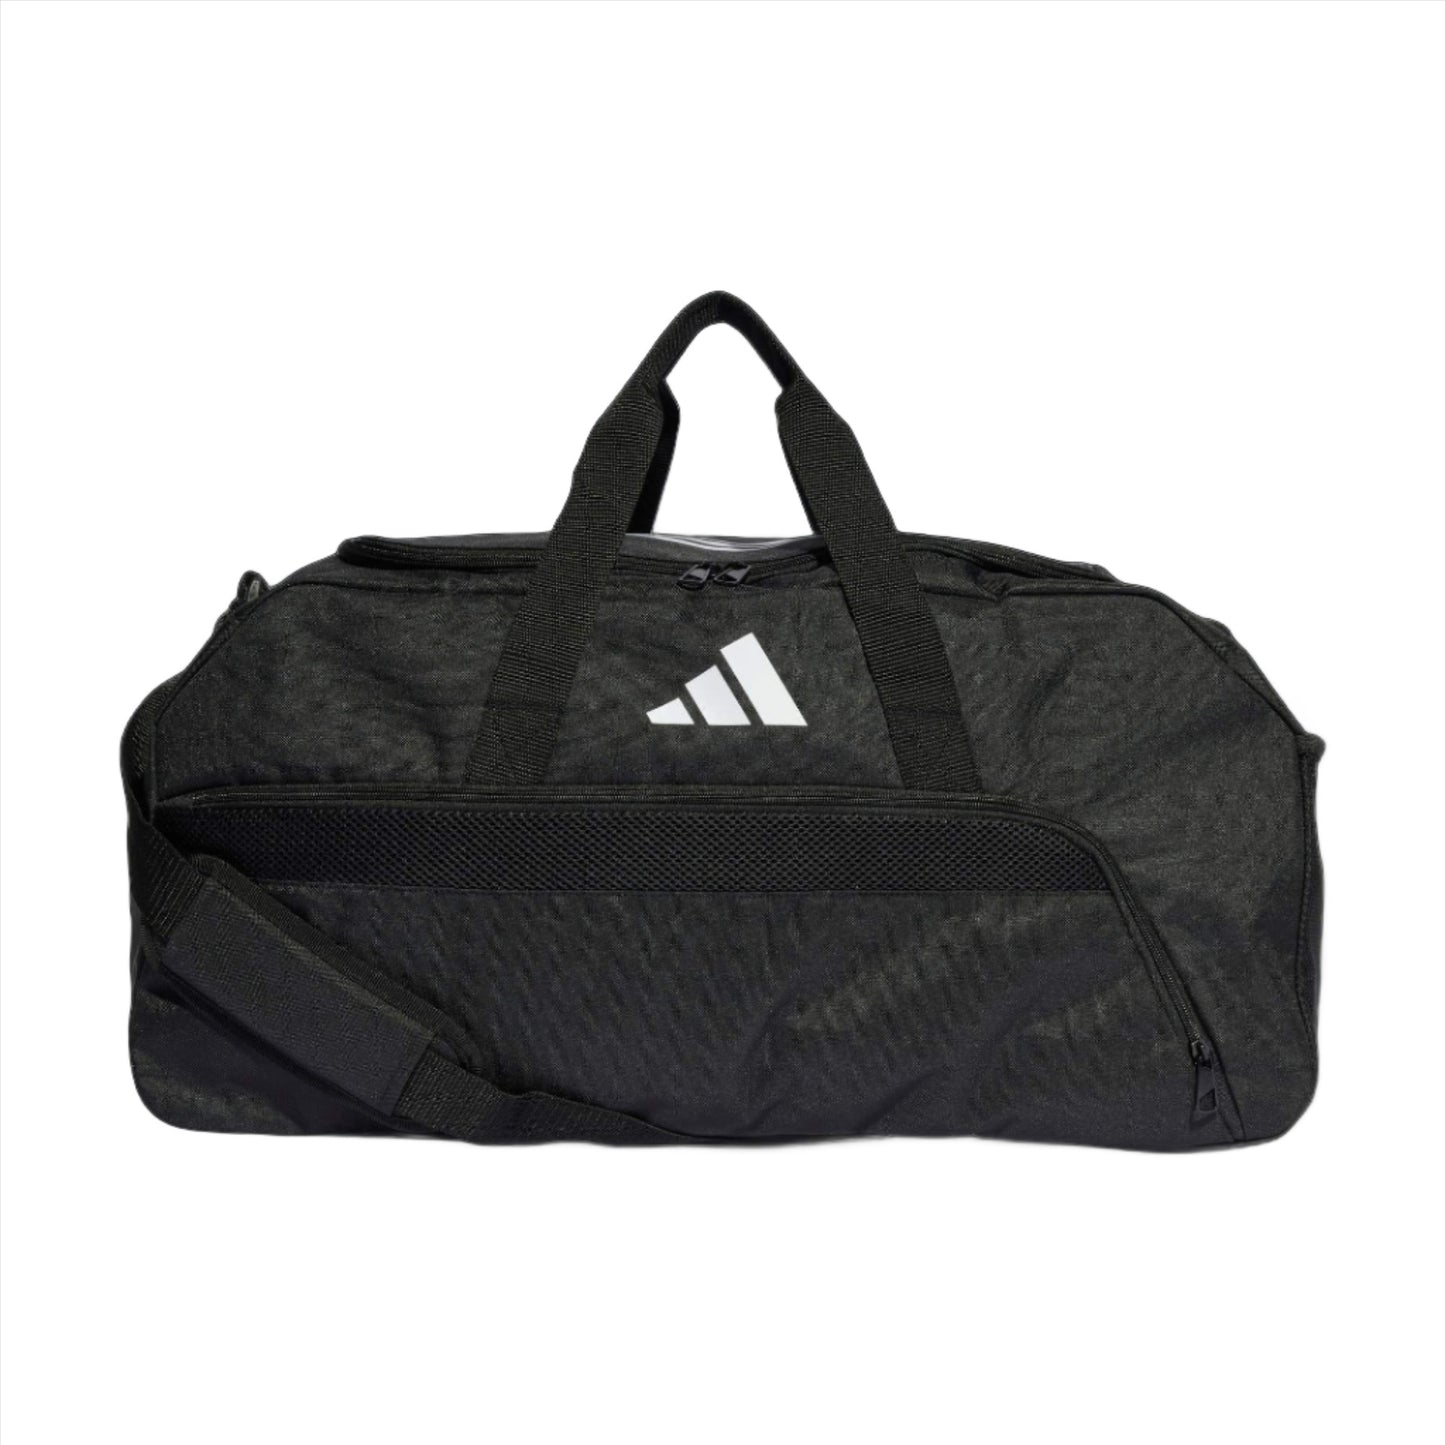 Tiro League Duffel Bag by Adidas - The Luxury Promotional Gifts Company Limited